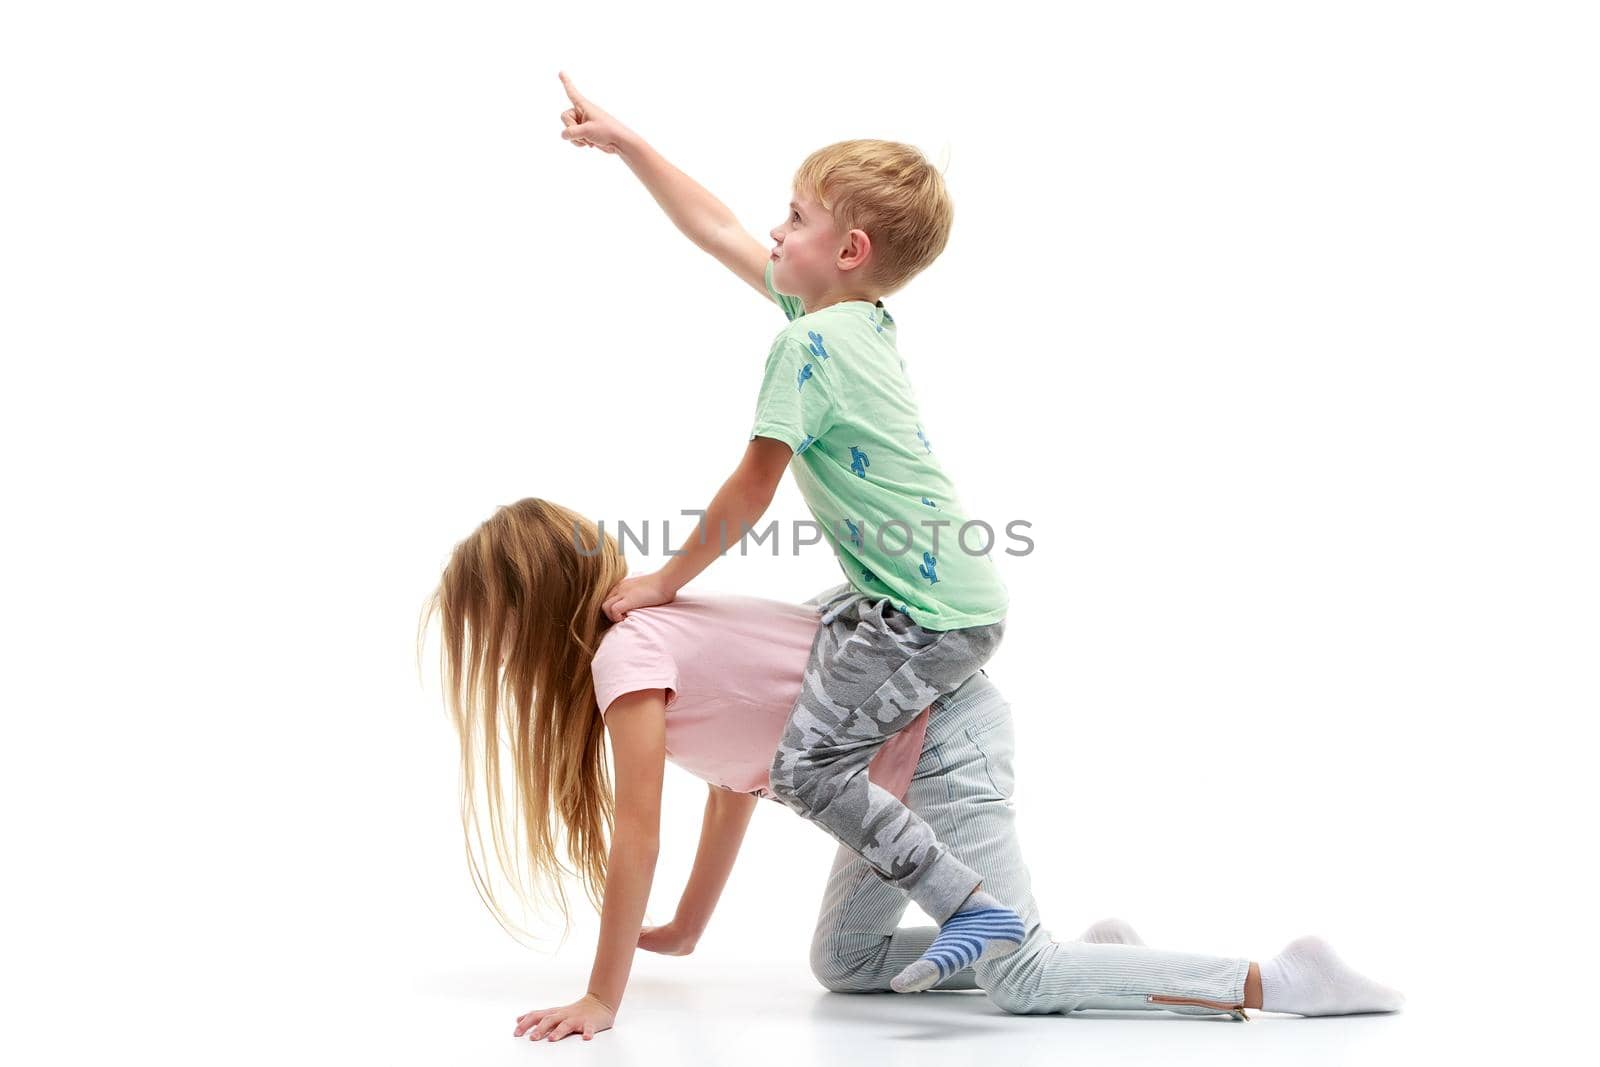 A little boy rides a girl like a horse. The concept of children's games. Isolated on white background.